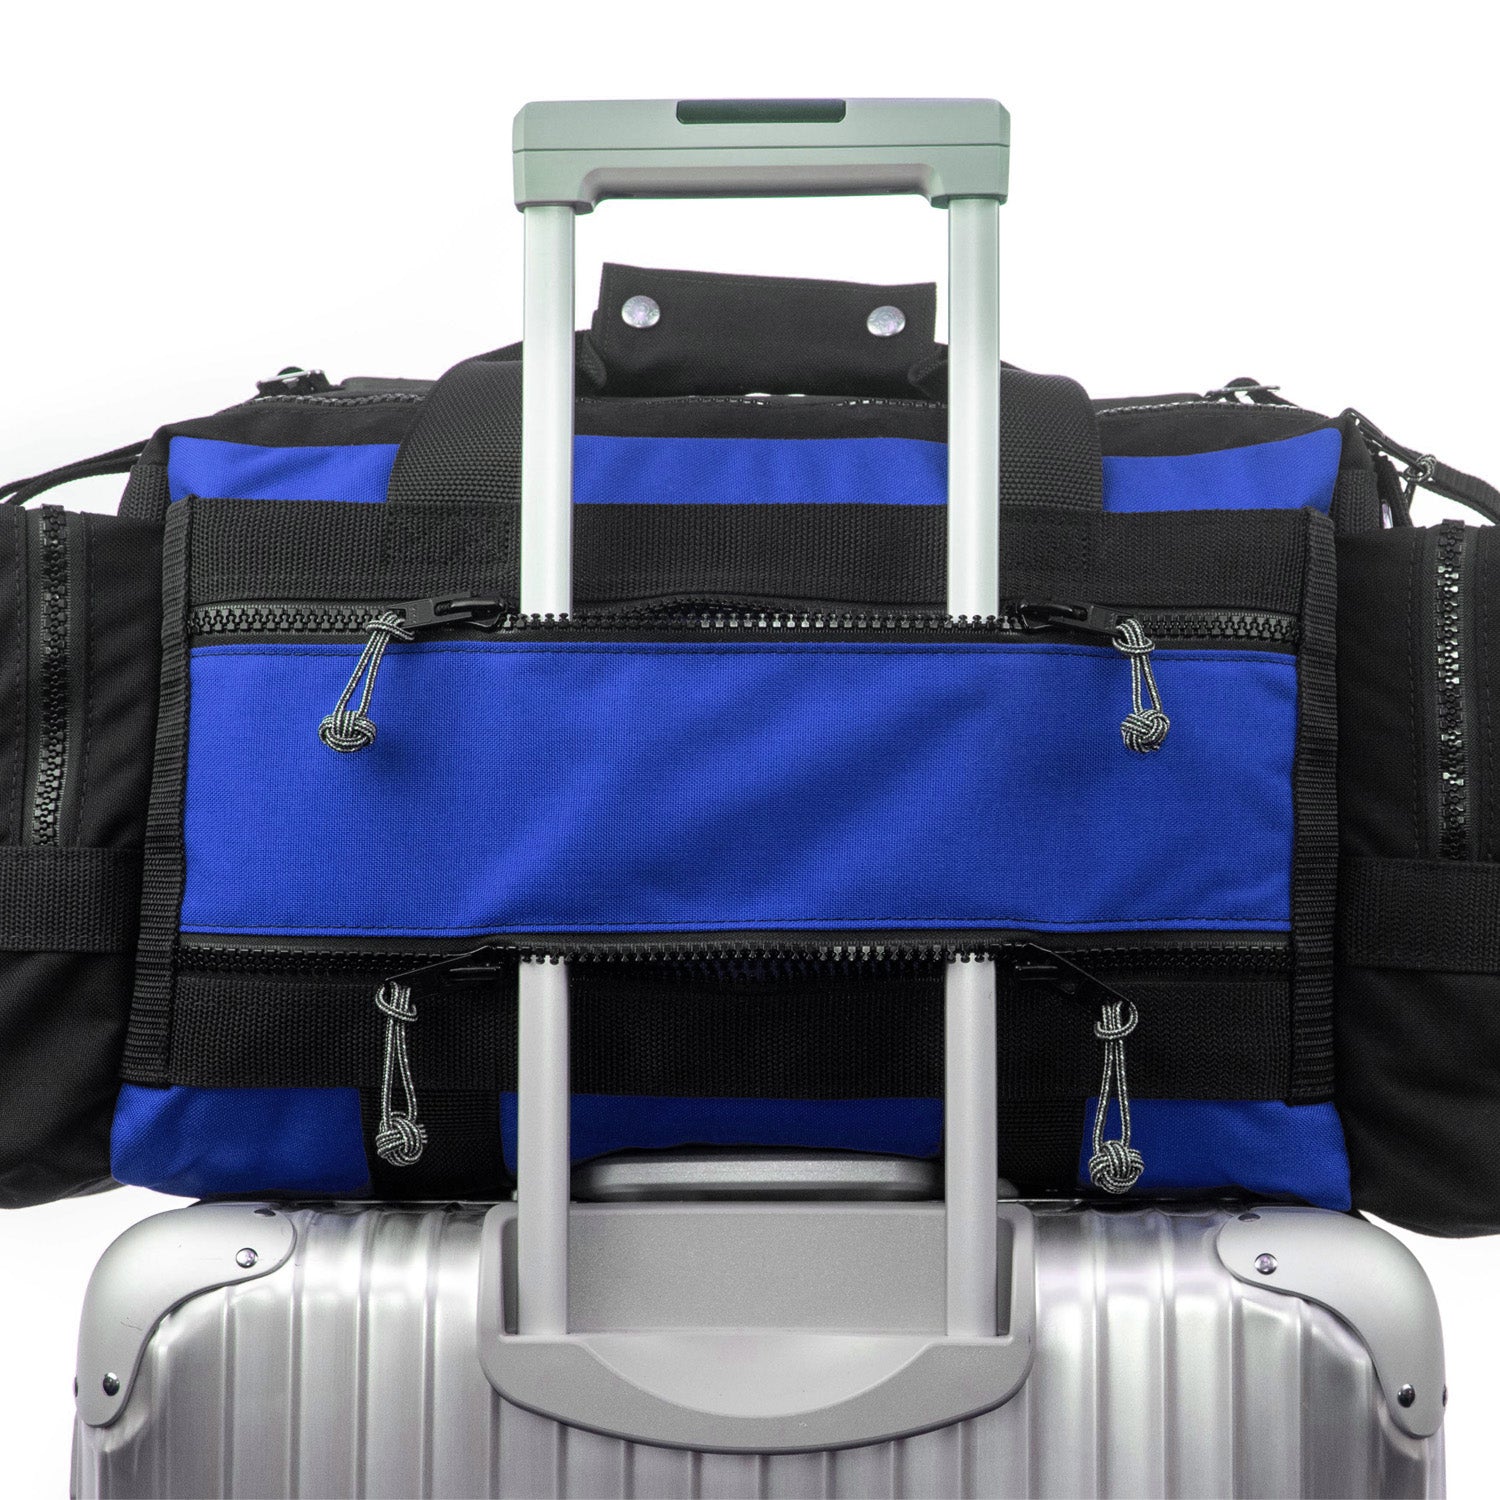 Pass thru pocket for easy mounting on wheeled luggage. 